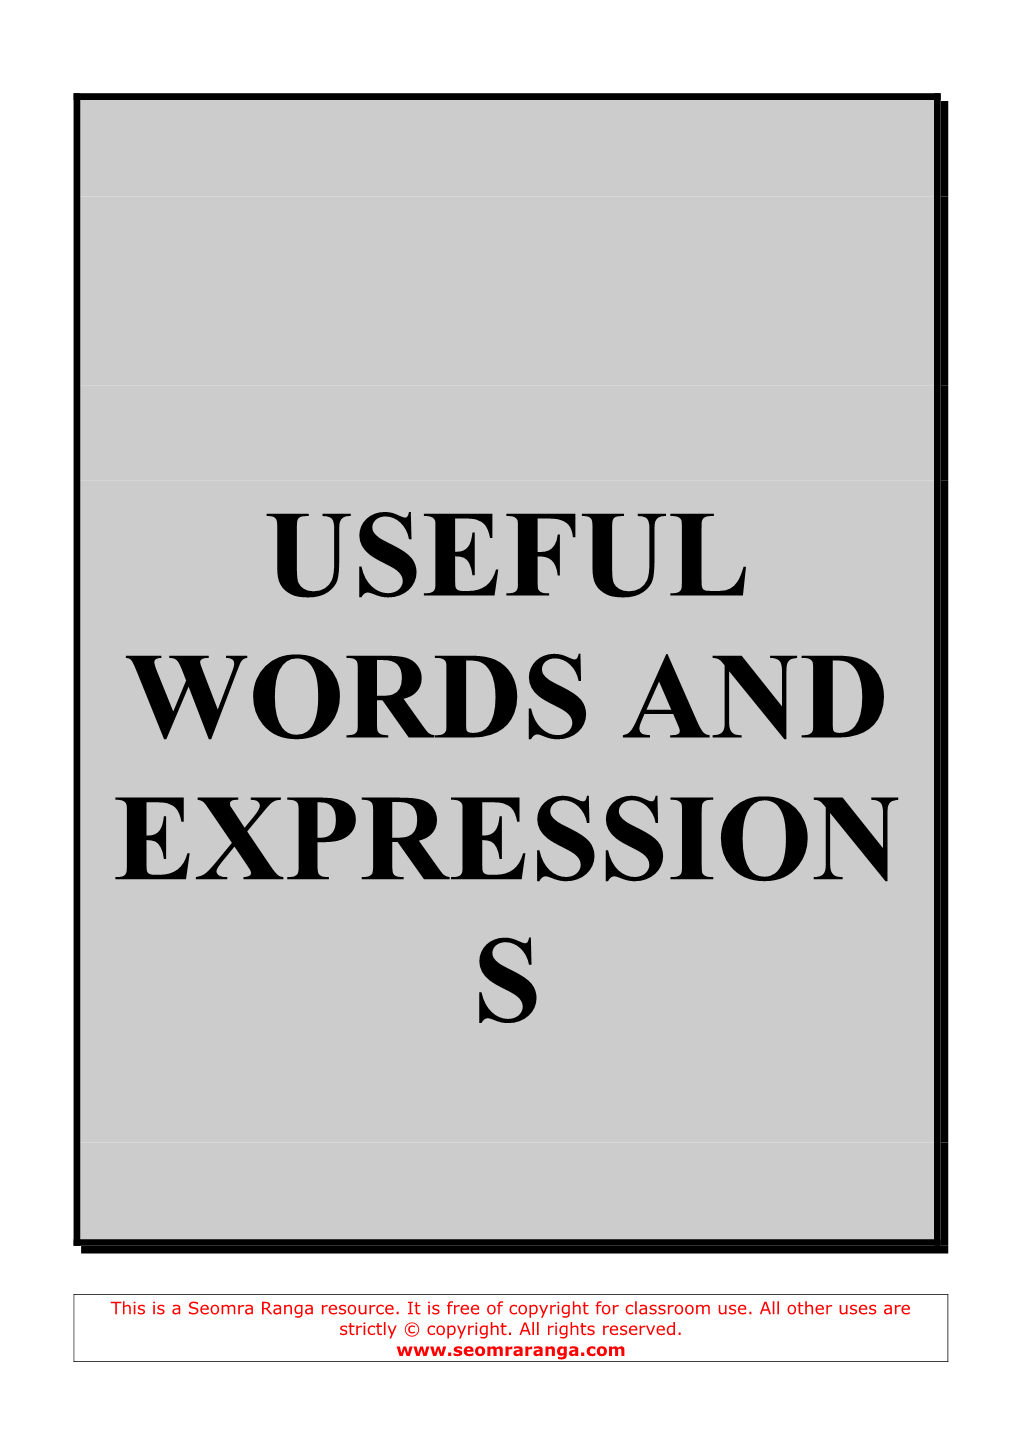 Useful Words and Expressions